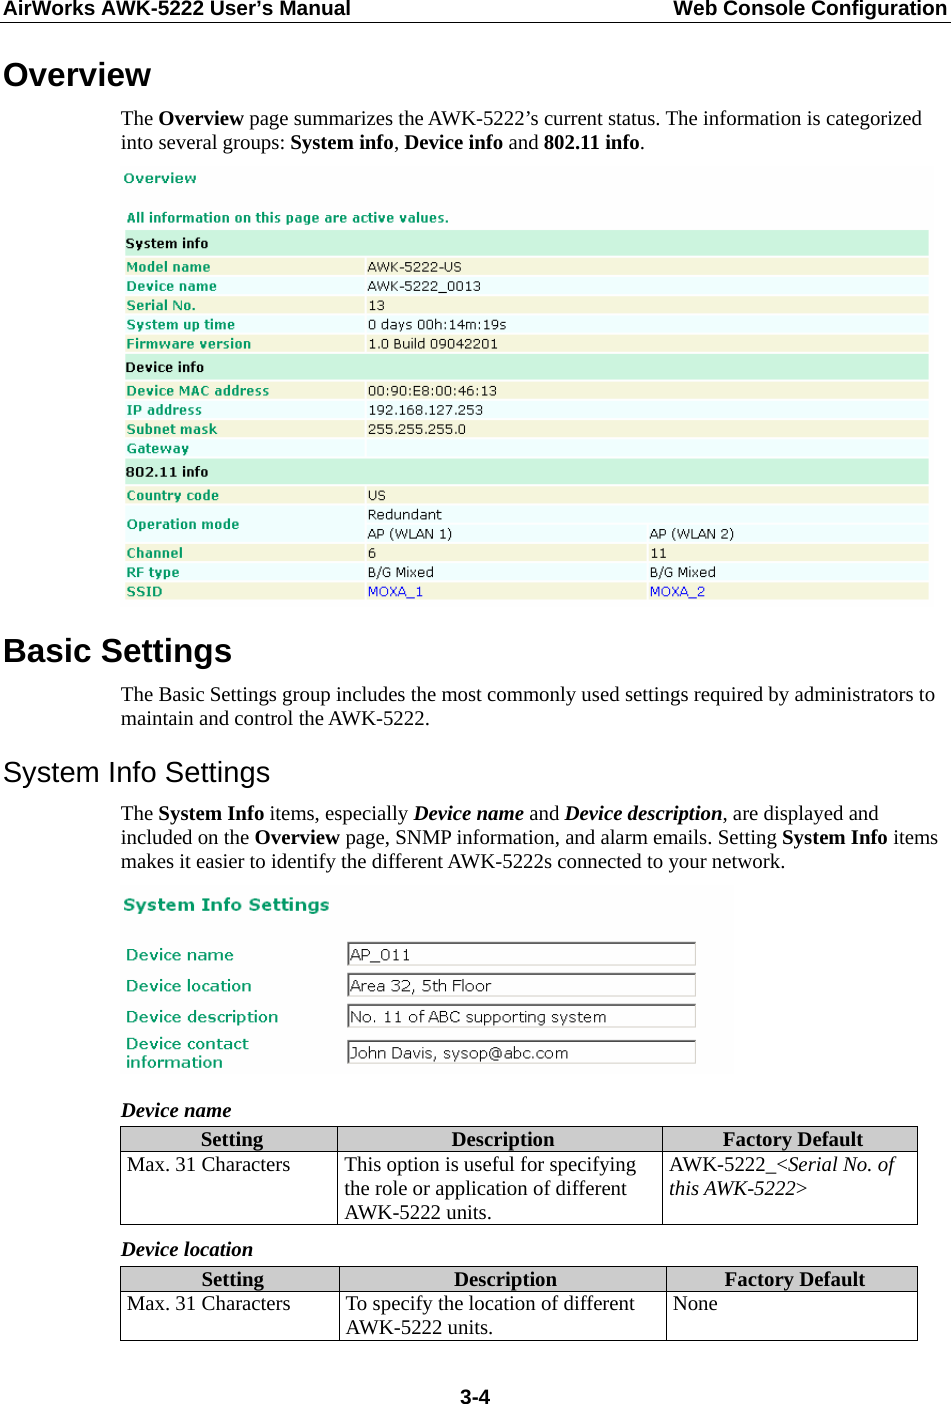 AirWorks AWK-5222 User’s Manual  Web Console Configuration  3-4Overview The Overview page summarizes the AWK-5222’s current status. The information is categorized into several groups: System info, Device info and 802.11 info.  Basic Settings The Basic Settings group includes the most commonly used settings required by administrators to maintain and control the AWK-5222. System Info Settings The System Info items, especially Device name and Device description, are displayed and included on the Overview page, SNMP information, and alarm emails. Setting System Info items makes it easier to identify the different AWK-5222s connected to your network.  Device name Setting  Description  Factory Default Max. 31 Characters  This option is useful for specifying the role or application of different AWK-5222 units. AWK-5222_&lt;Serial No. of this AWK-5222&gt; Device location Setting  Description  Factory Default Max. 31 Characters  To specify the location of different AWK-5222 units.  None 